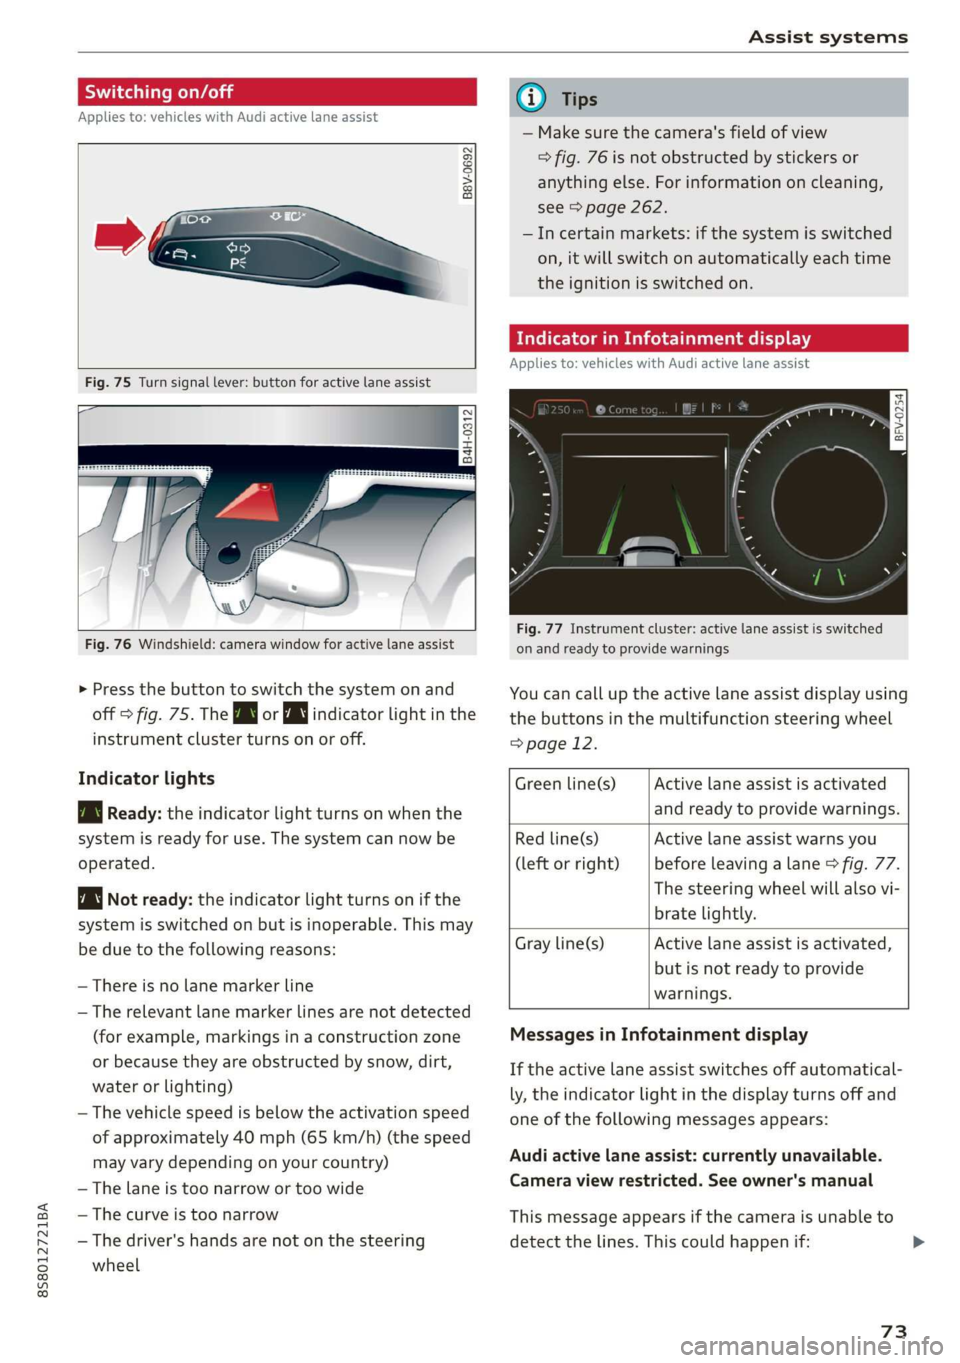 AUDI TT ROADSTER 2019  Owners Manual 8S8012721BA 
Assist systems 
  
Switching on/off 
Applies to: vehicles with Audi active lane assist 
  
B8V-0692 
  
  
Fig. 75 Turn signal lever: button for active lane assist 
  
B4H-0312 
  
    
F